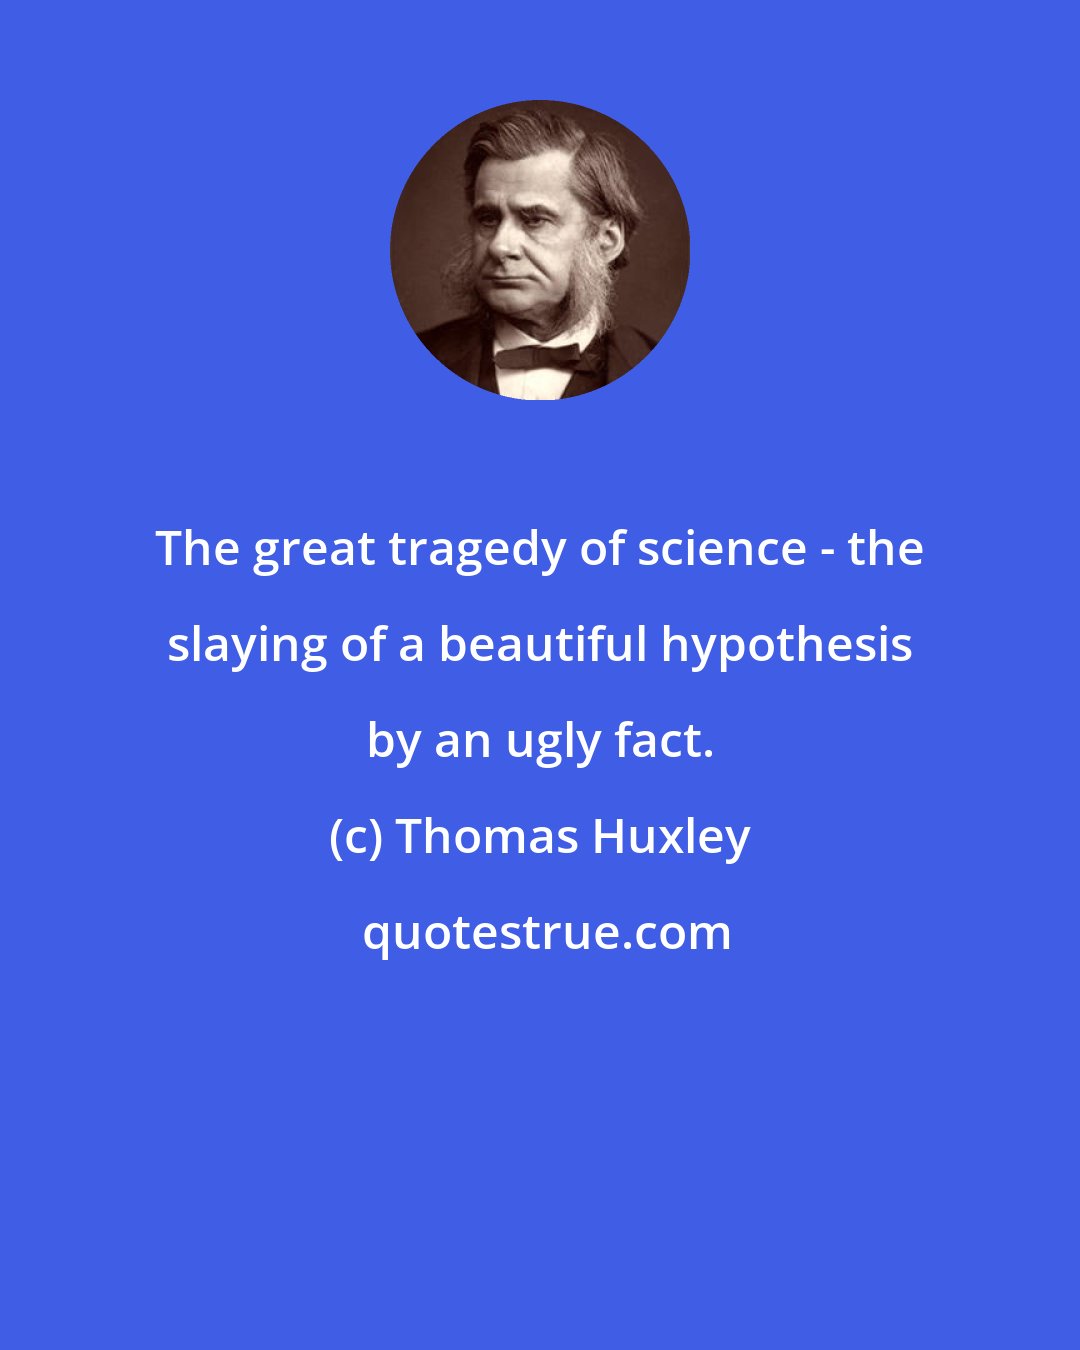 Thomas Huxley: The great tragedy of science - the slaying of a beautiful hypothesis by an ugly fact.